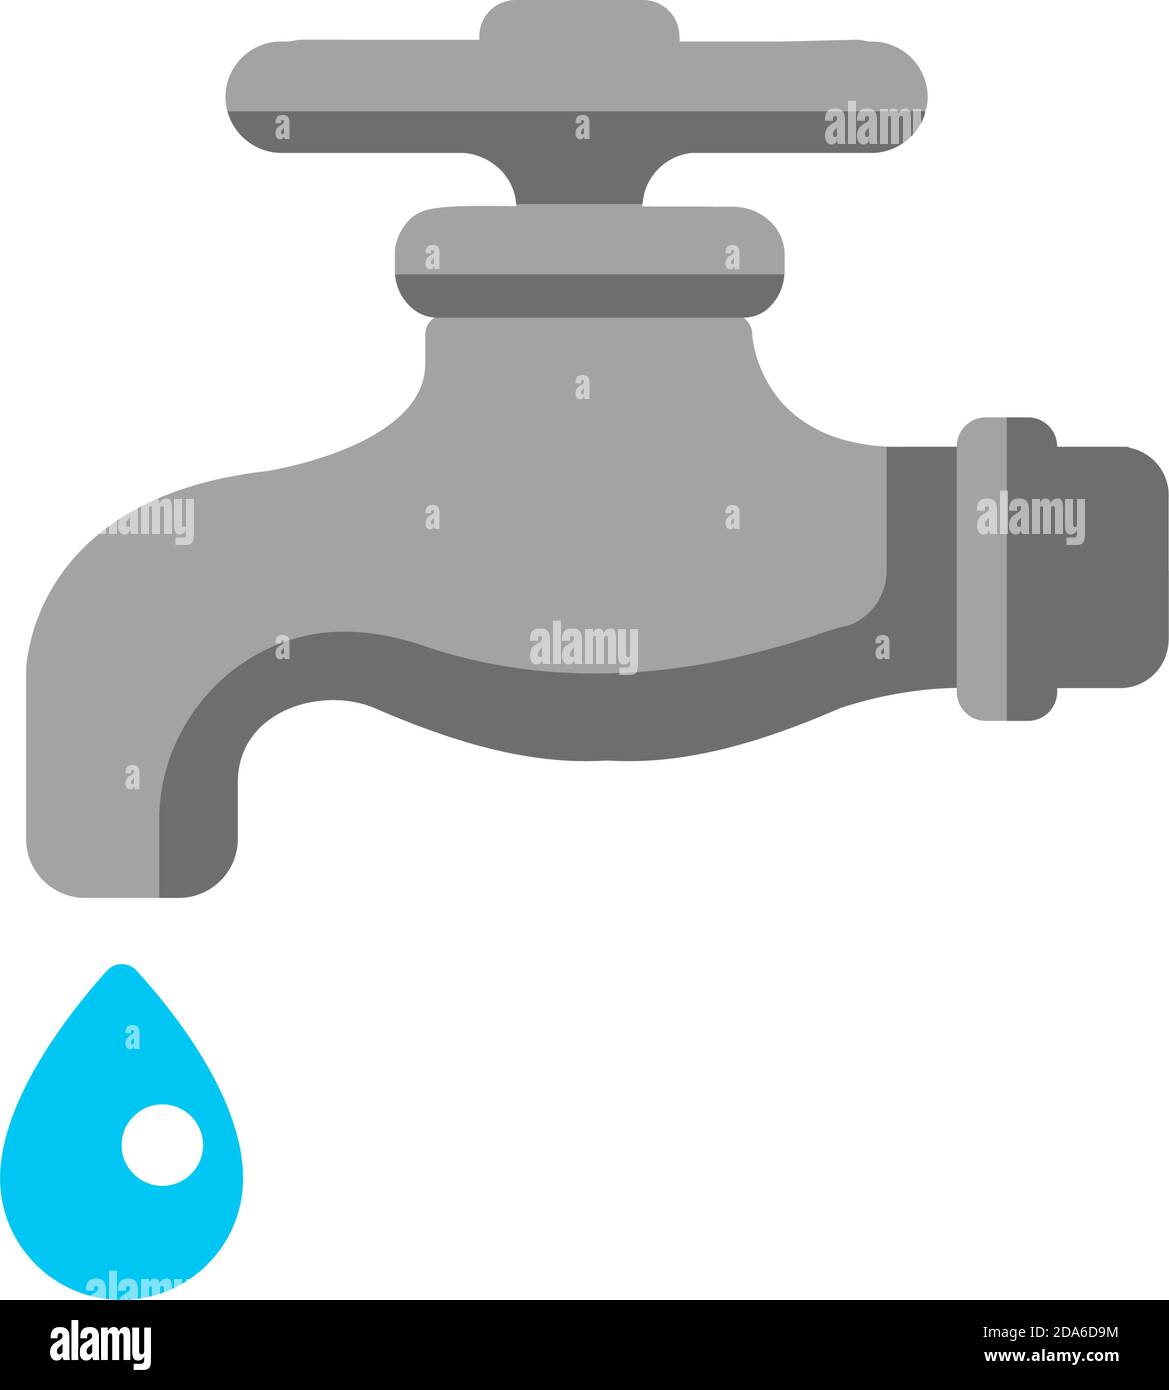 waterworks / faucet / water tap icon illustration Stock Vector